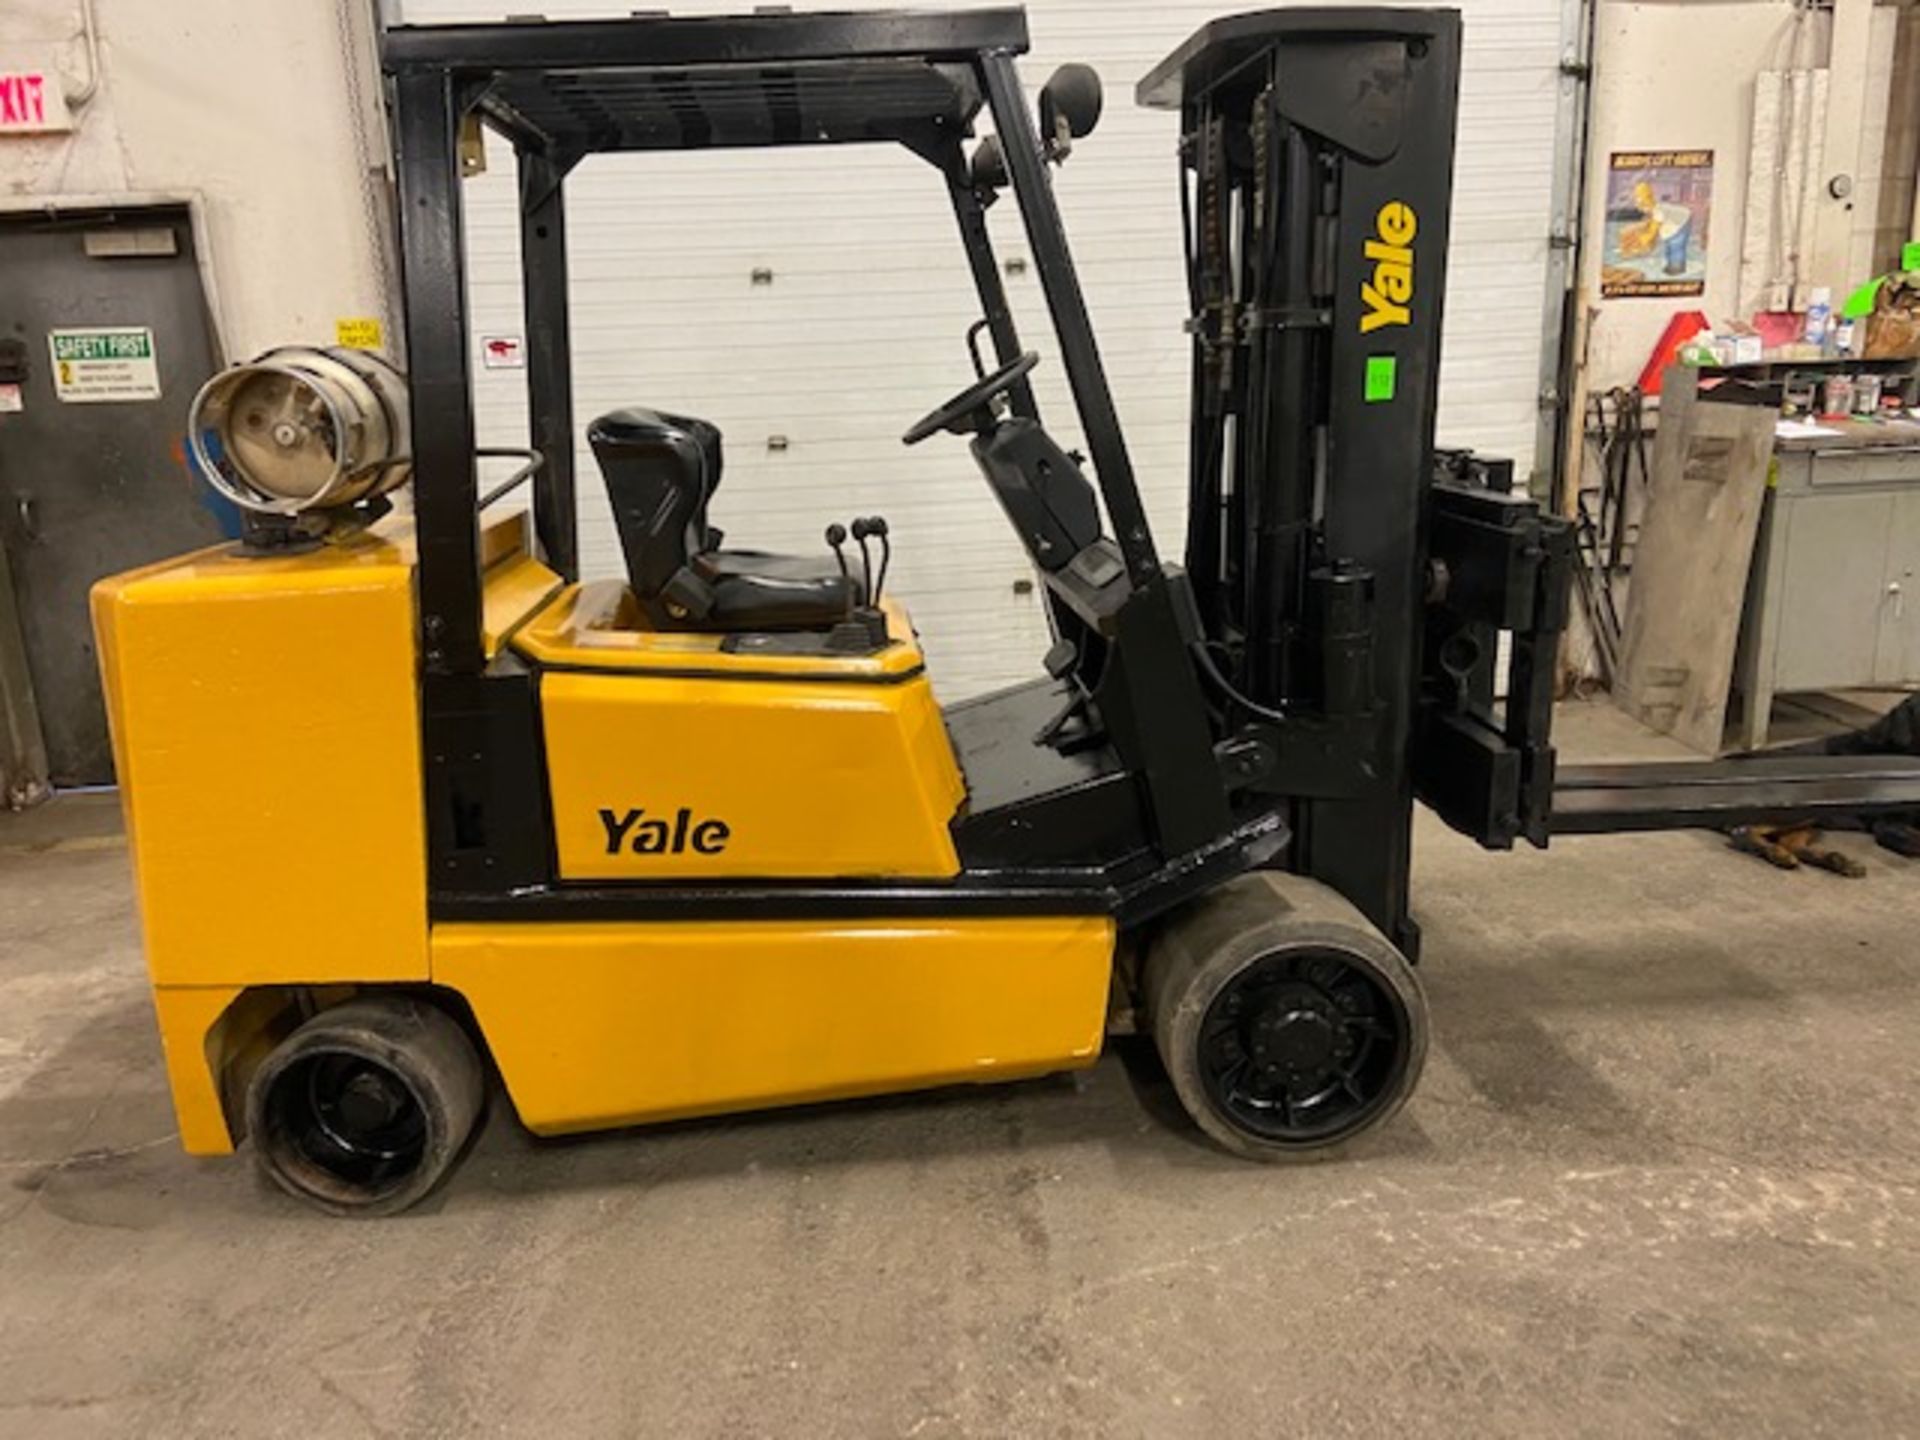 FREE CUSTOMS - Yale 10000lbs capacity LPG (propane) Forklift with 3-stage mast & sideshift (no